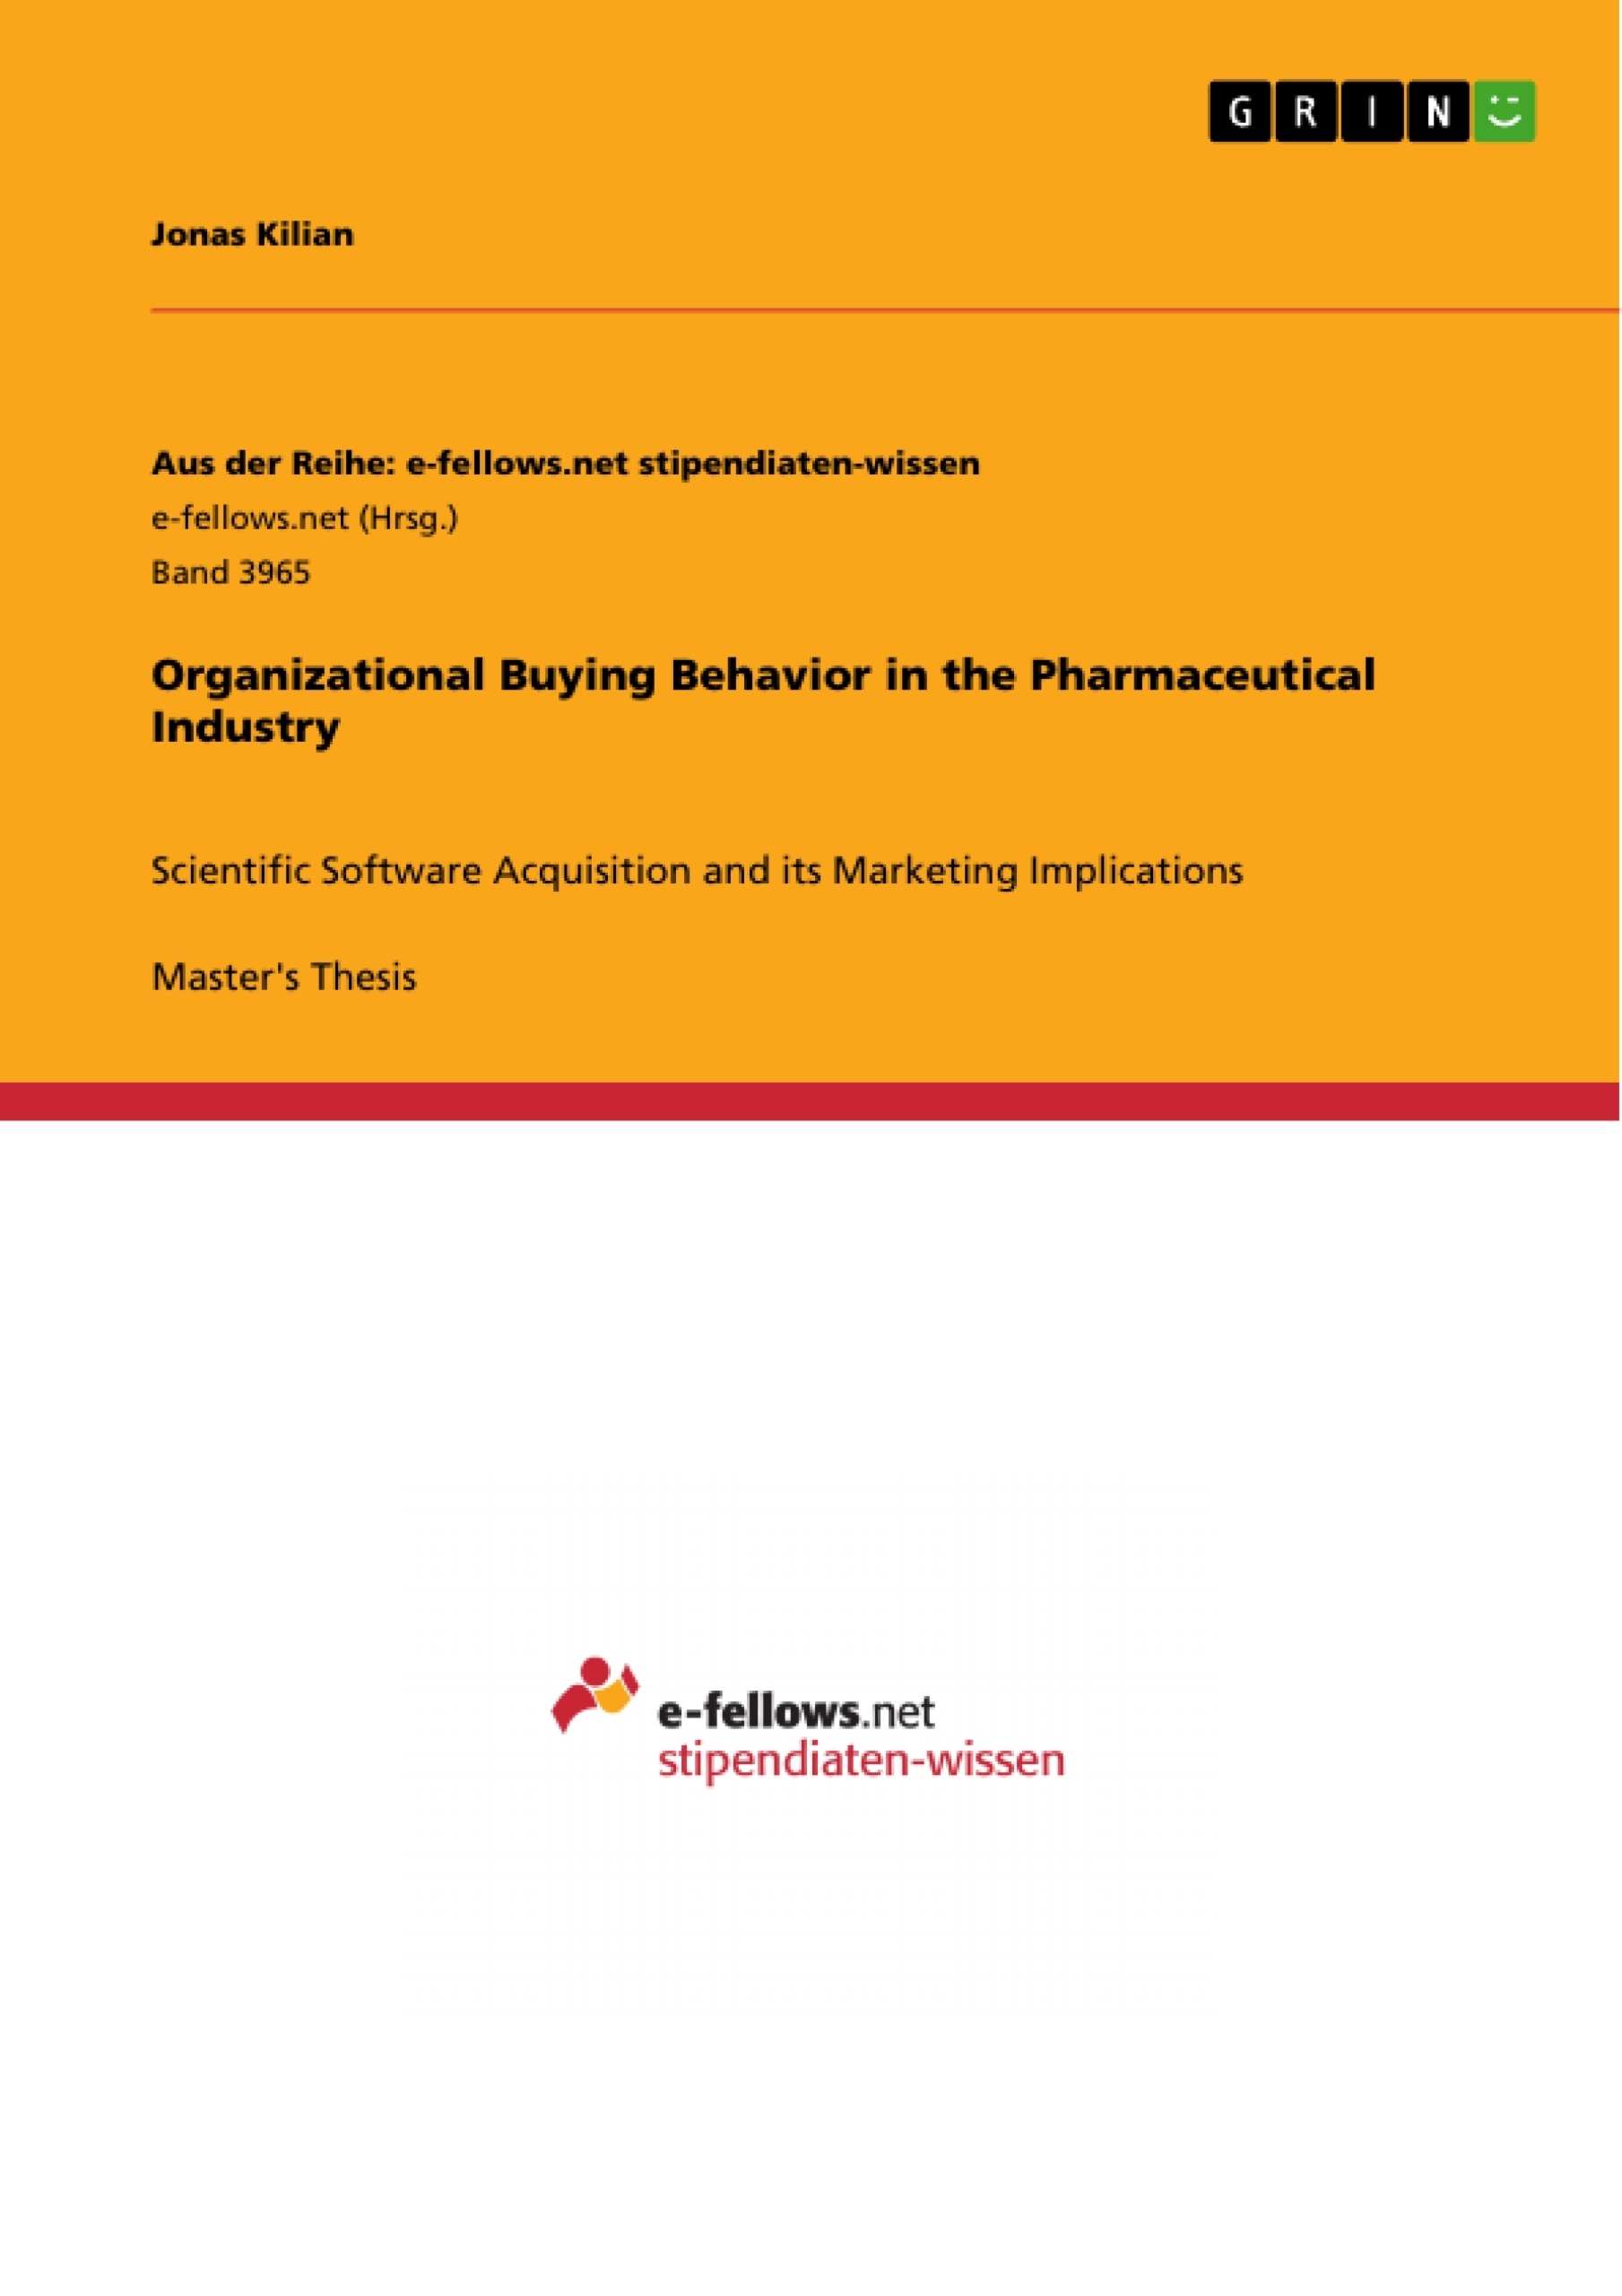 Title: Organizational Buying Behavior in the Pharmaceutical Industry